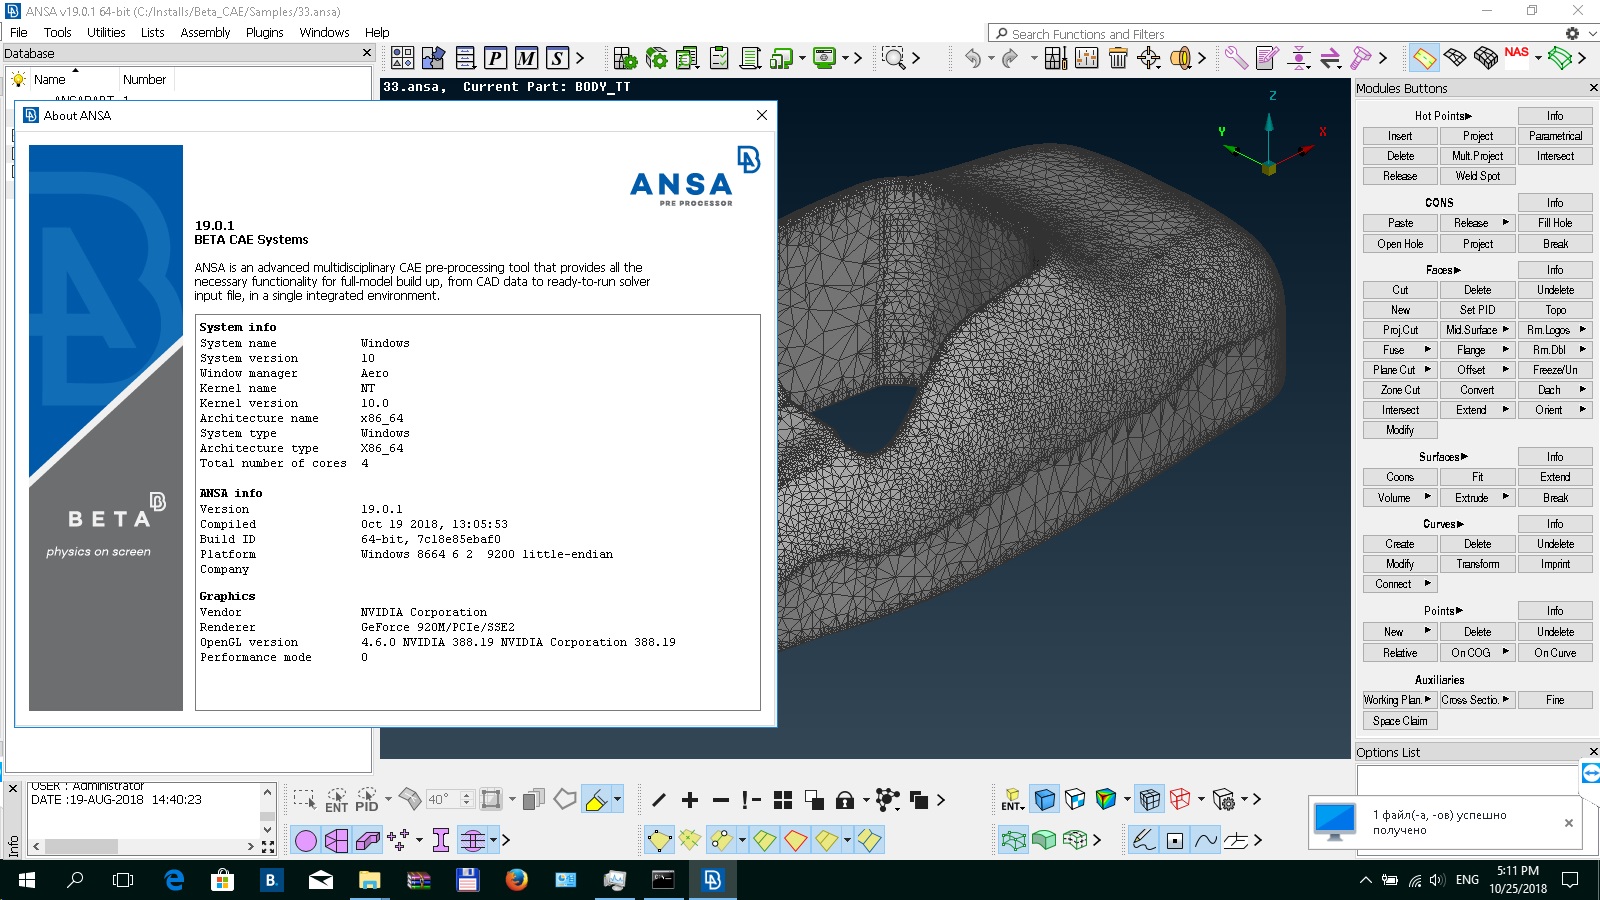 Working with BETA-CAE Systems v19.0.1 - ANSA full